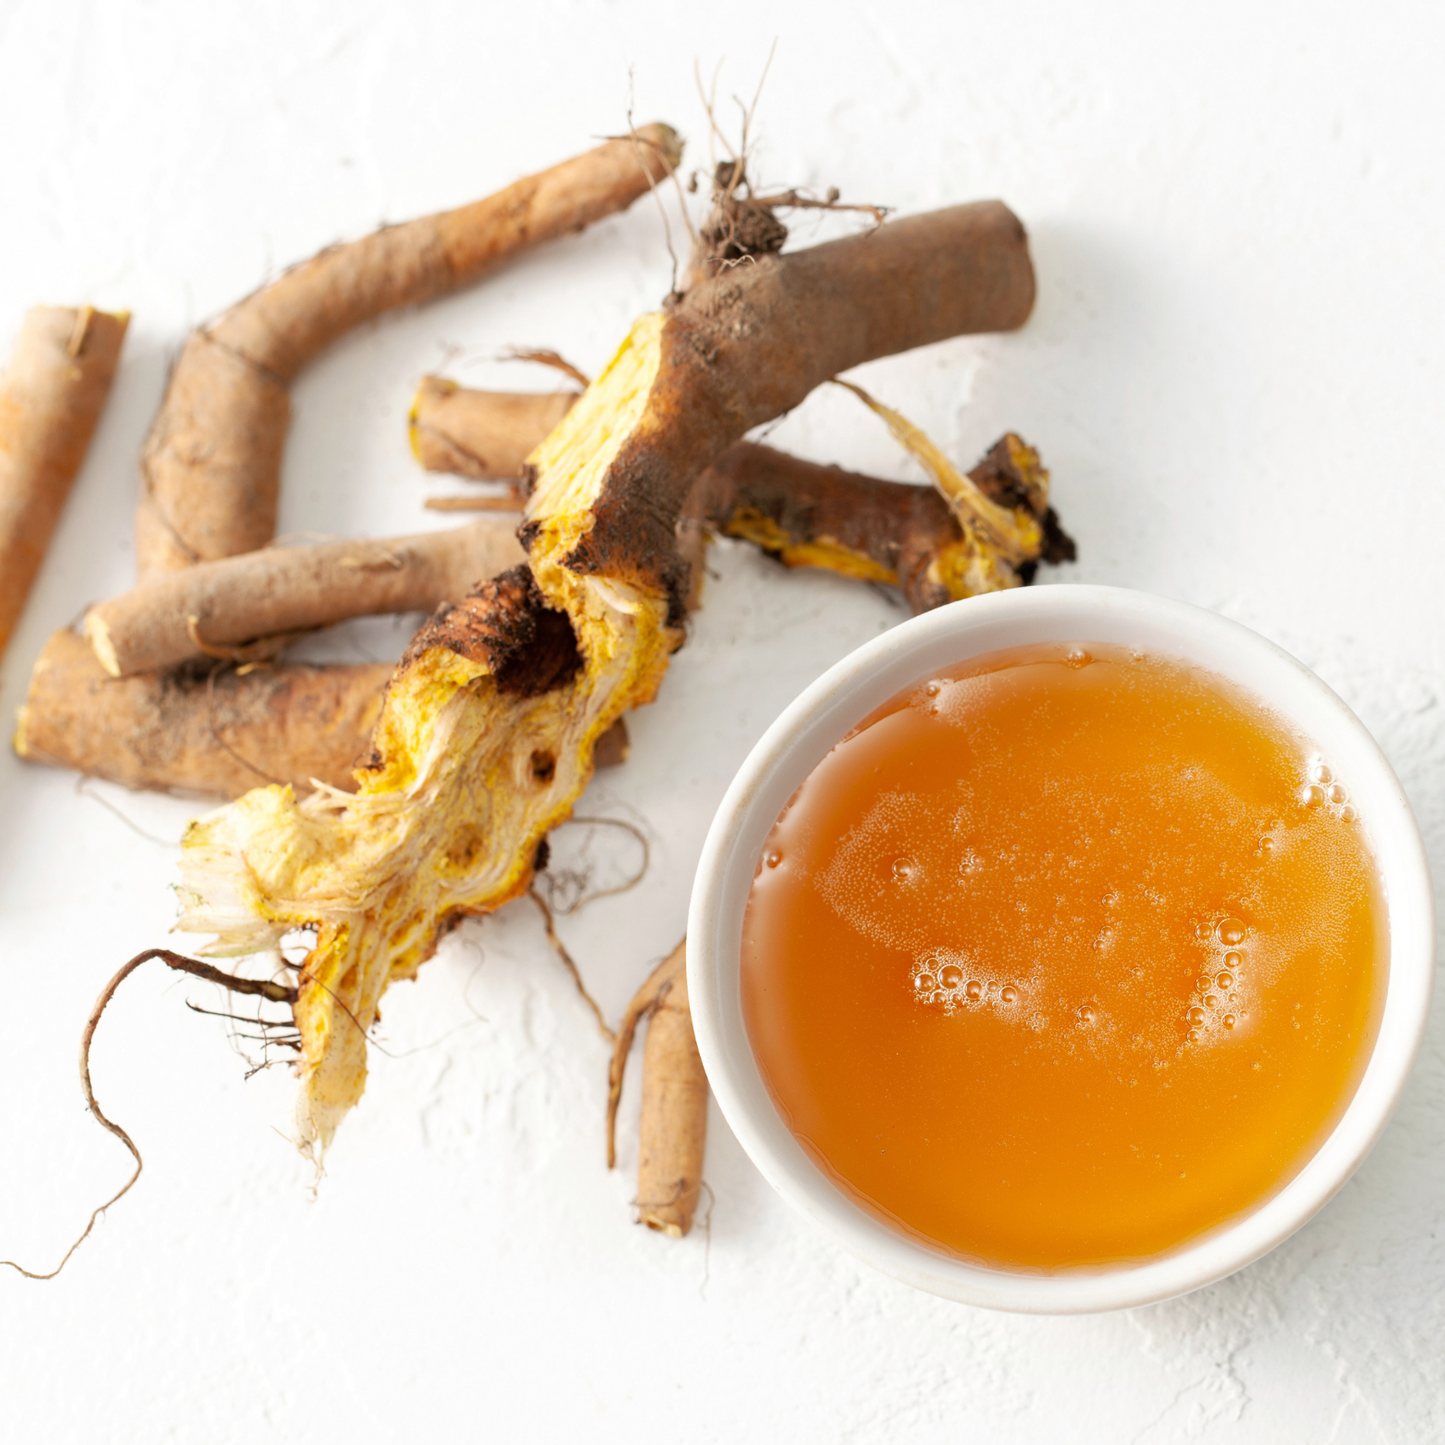 Witchy Pooh's Yellow Dock Root For Blood Purification, Smudging For Ritual to Release Past Traumas